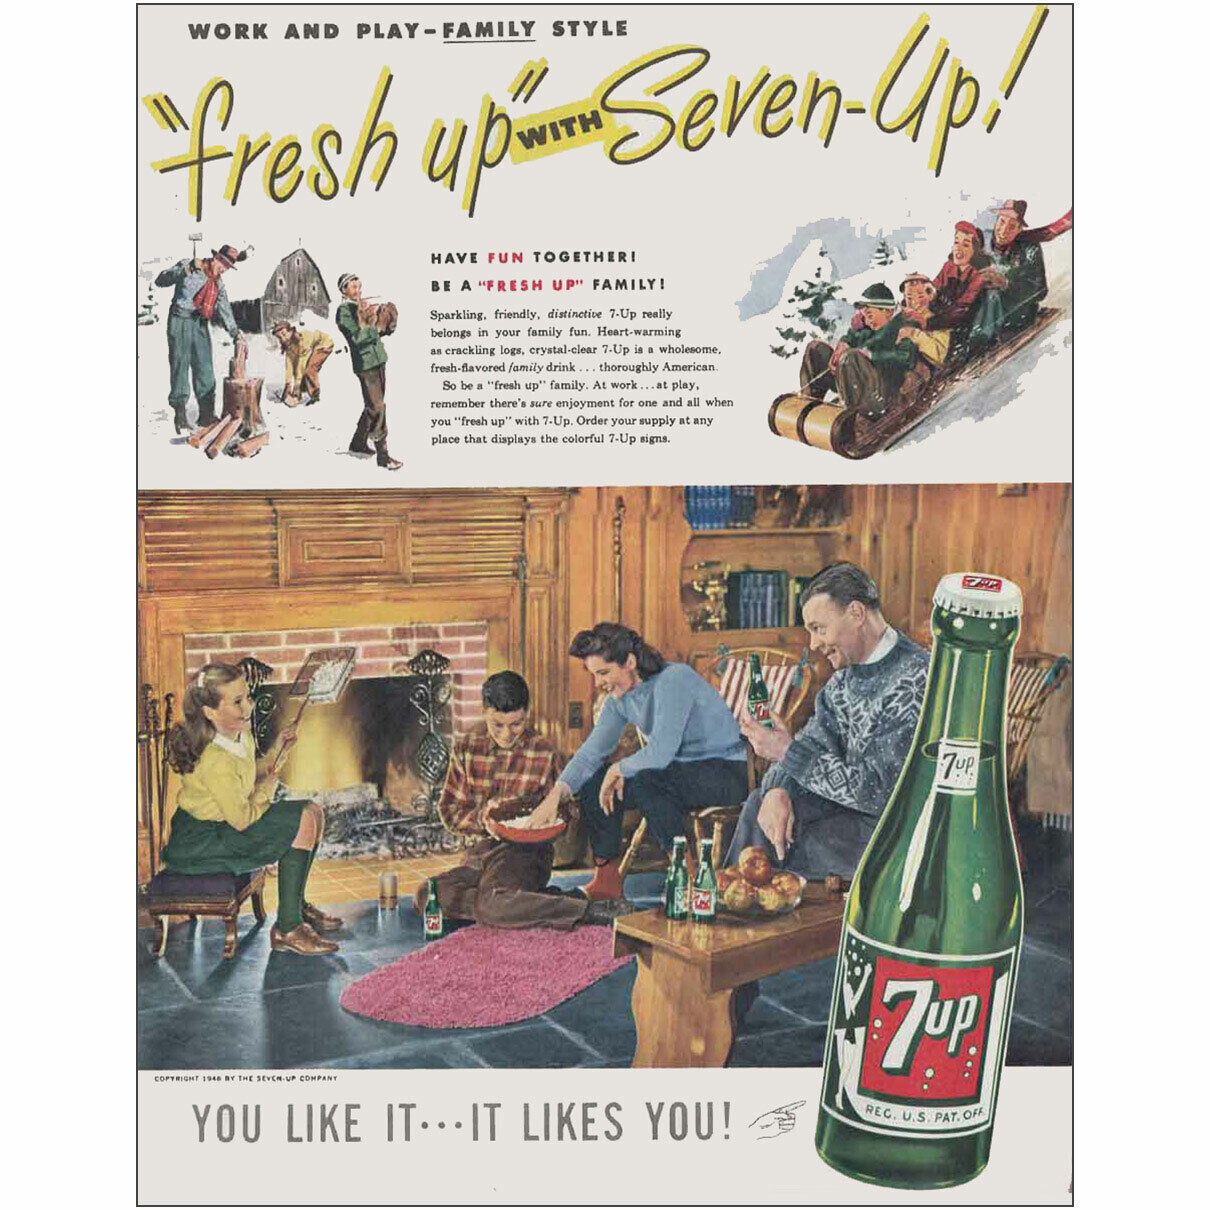 1946 7Up: Fresh Up with Seven Up Play Family Style Vintage Print Ad